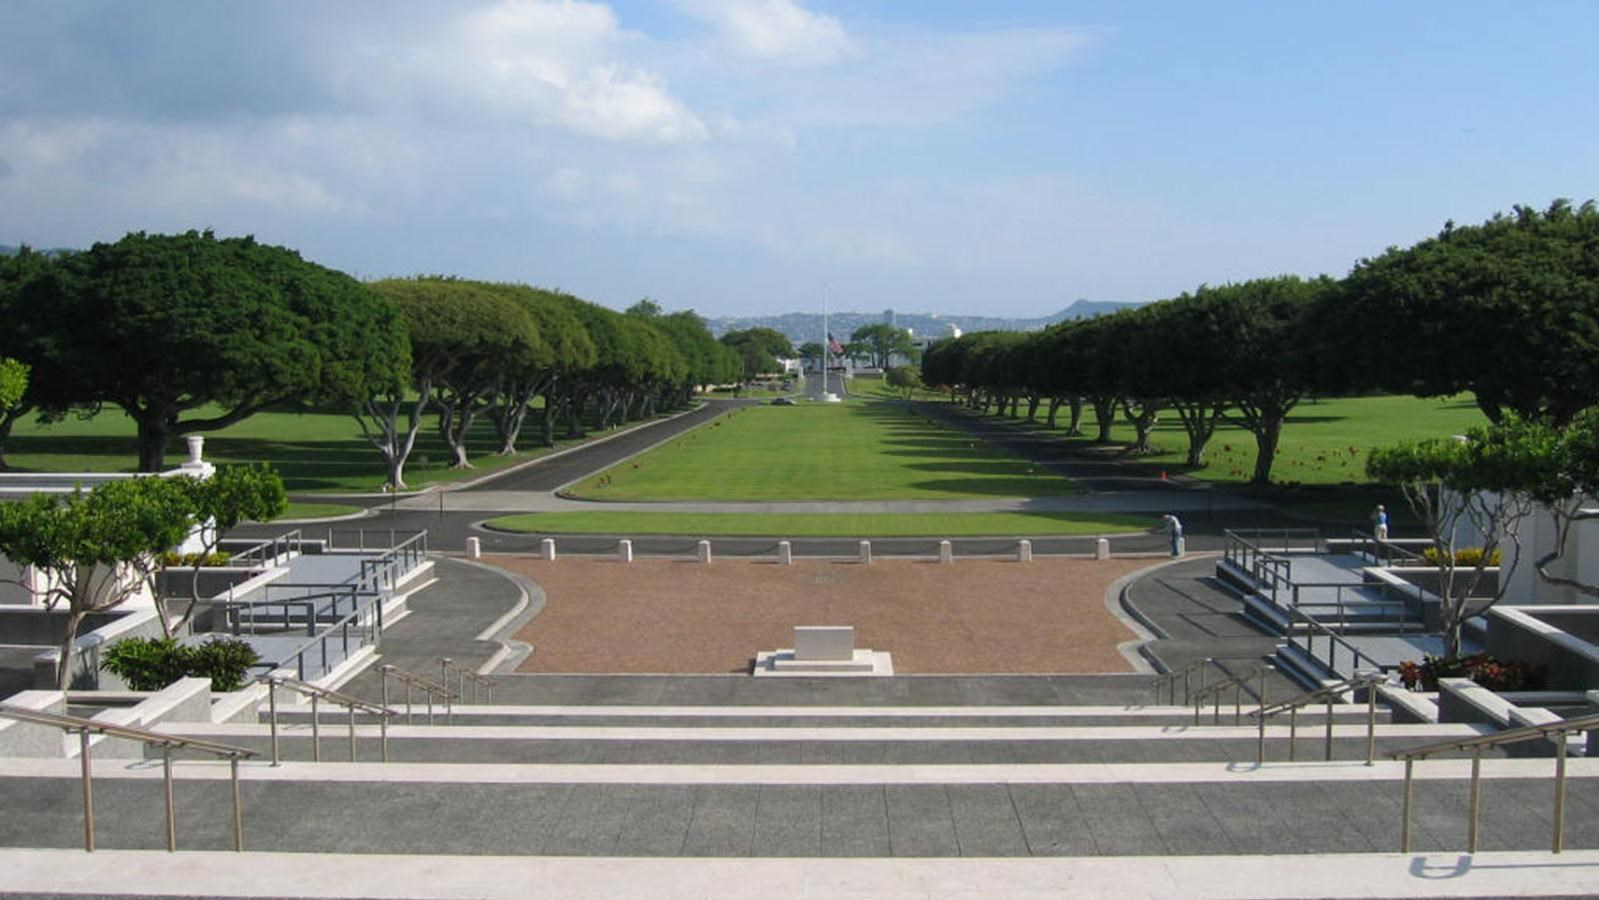 View along the memorial cemetery lawn flanked by trees. Image by Jiang, public domain (Wikimedia)